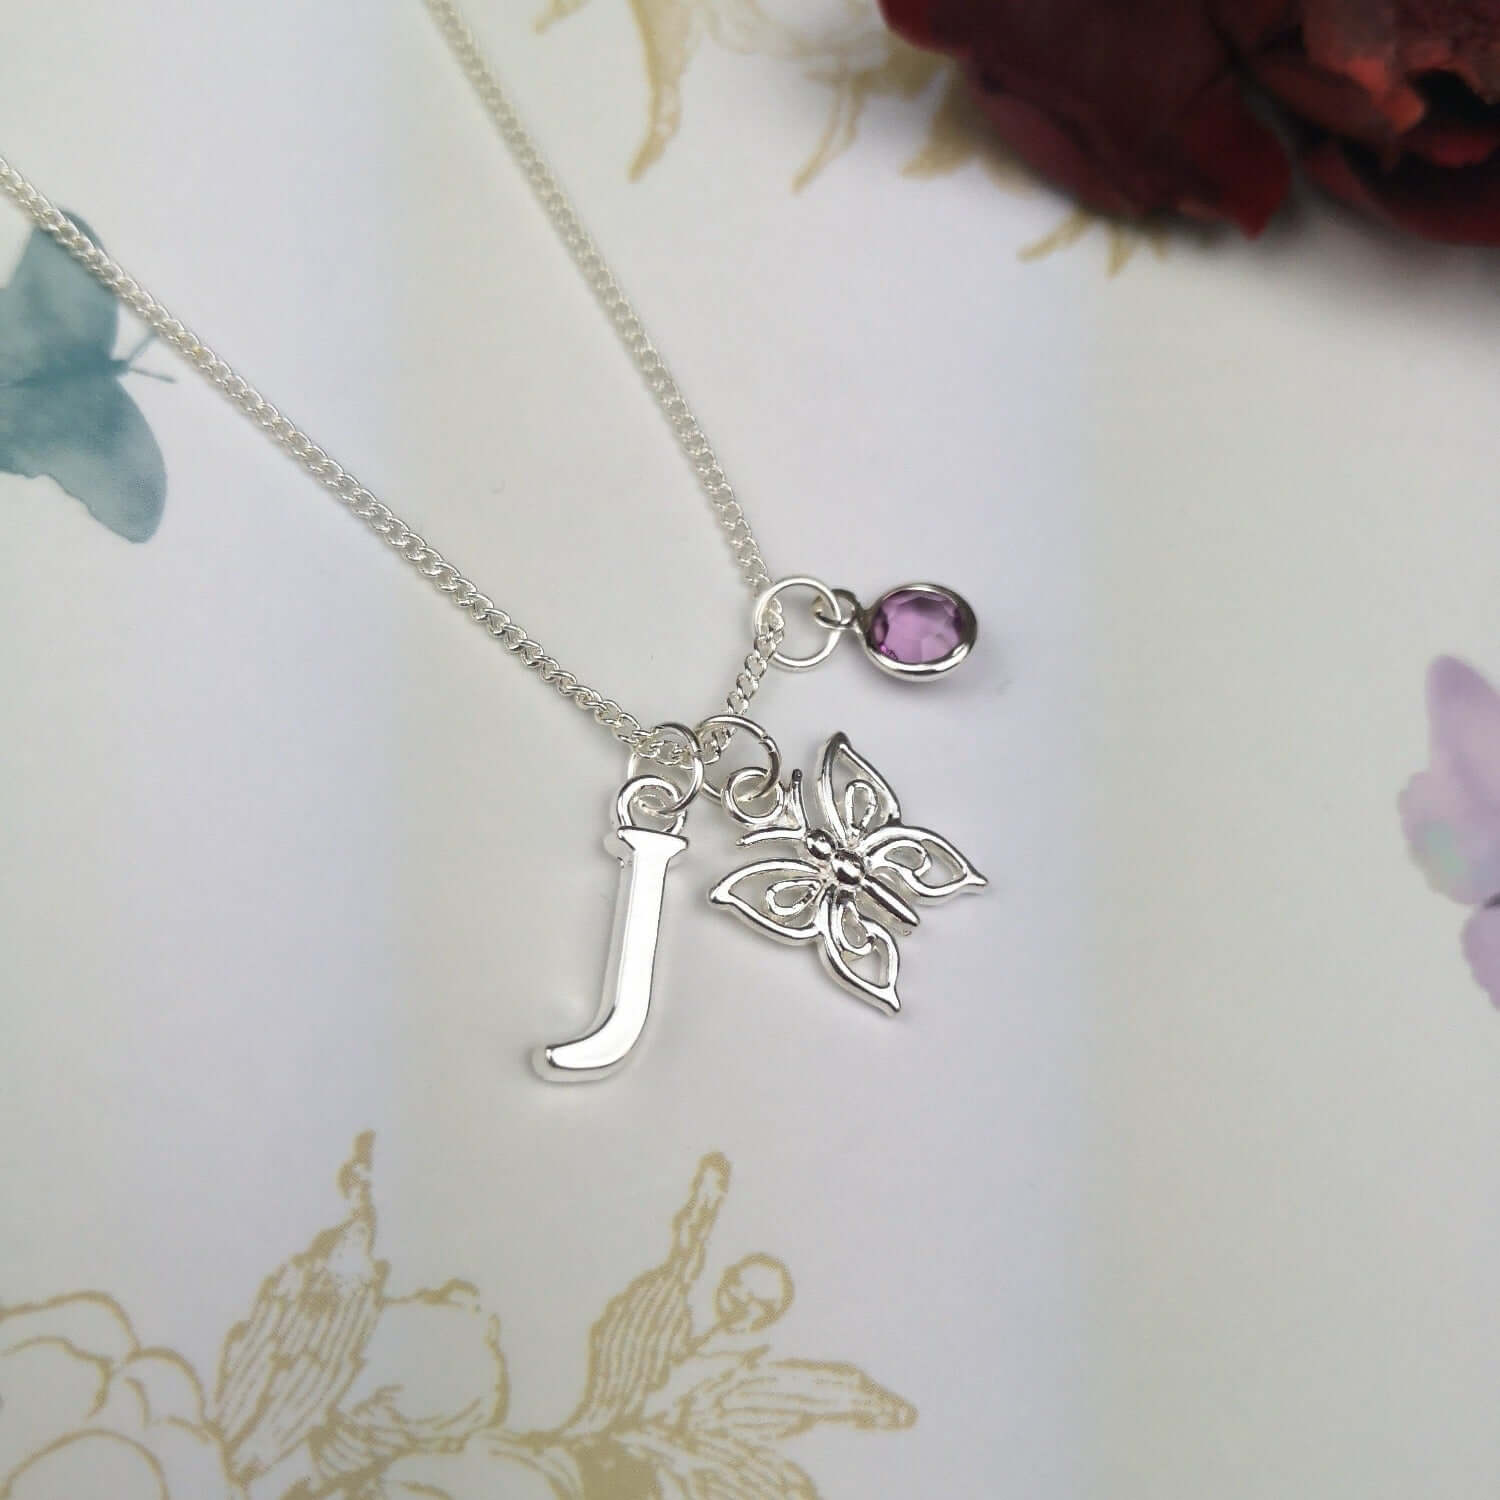 Personalised butterfly necklace with initial and birthstone